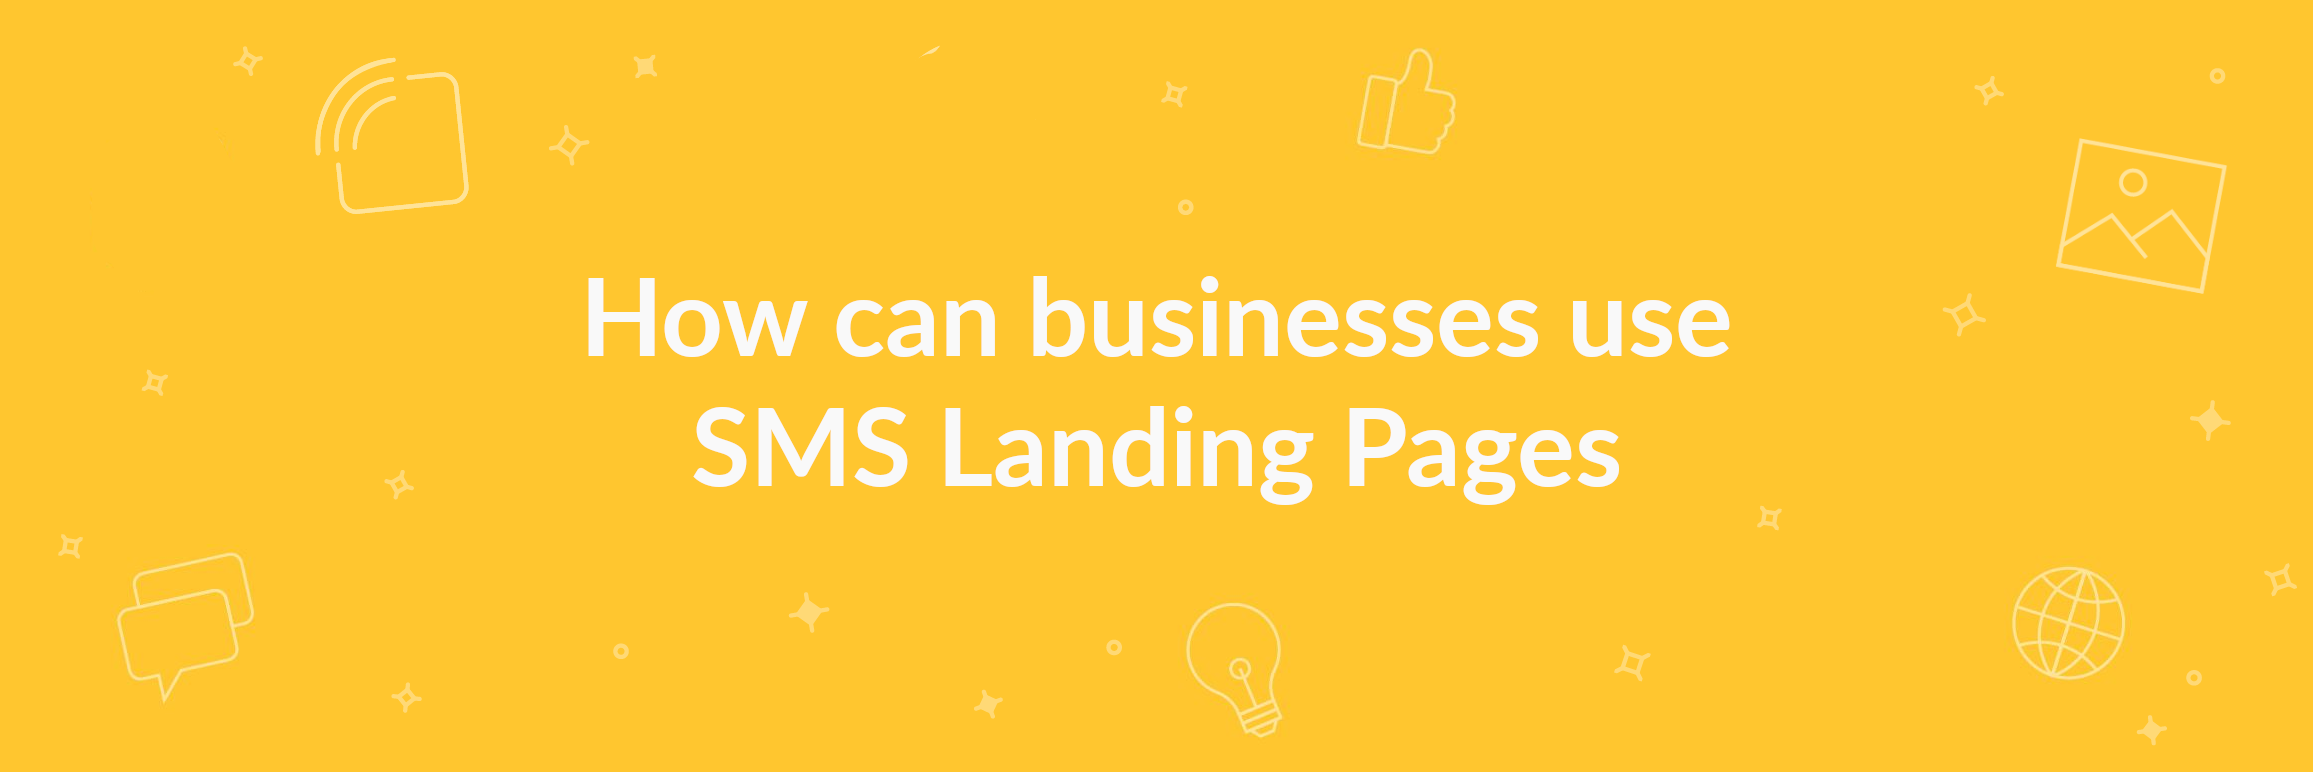 SMS Landing Page banner